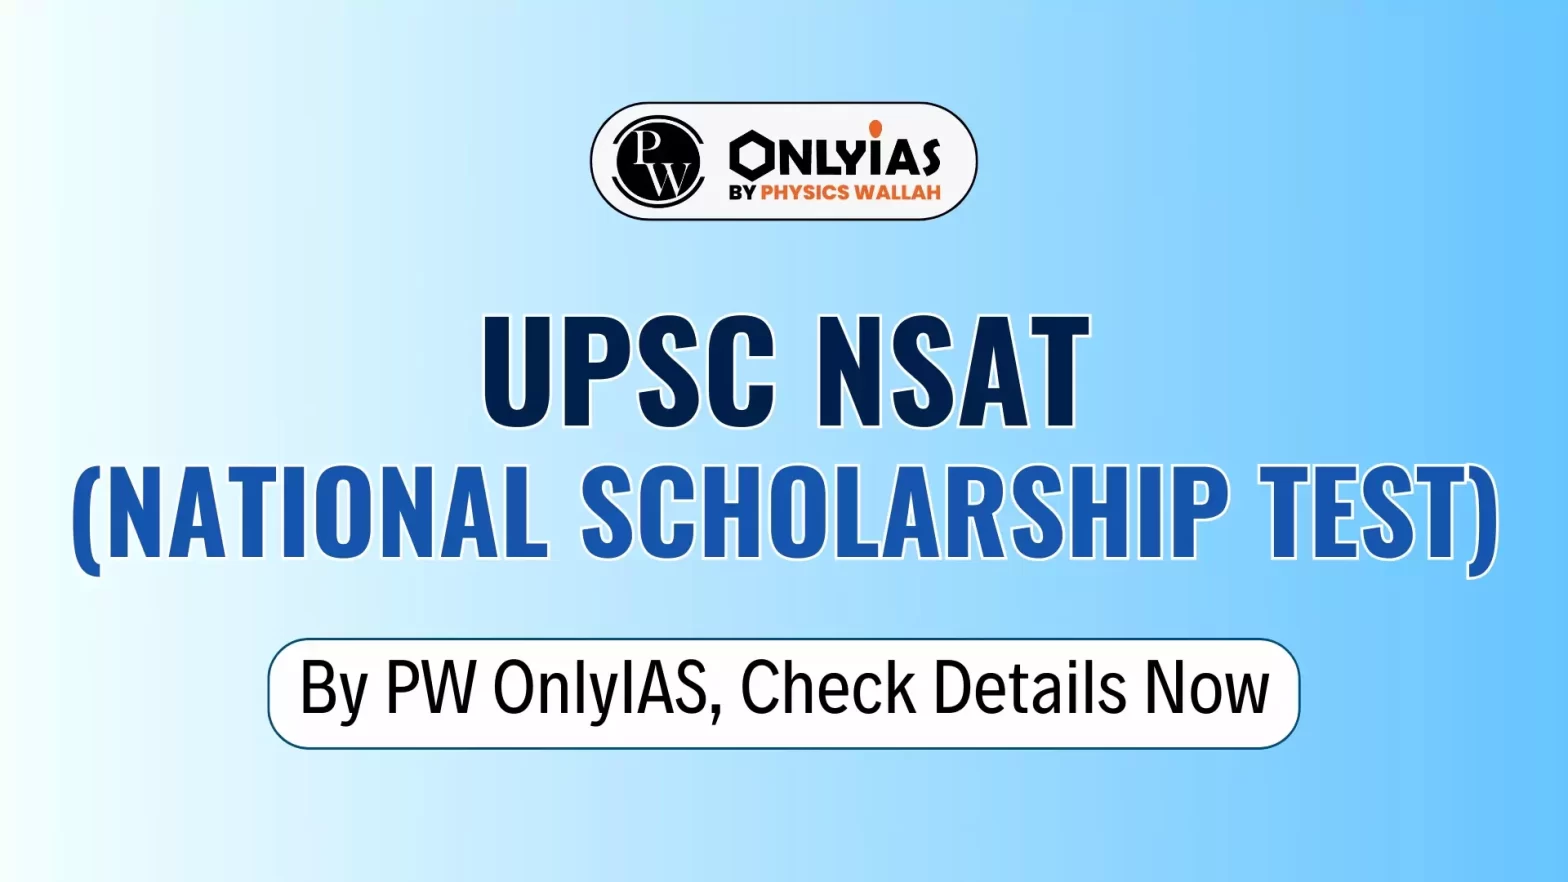 UPSC NSAT (National Scholarship Test) by PW OnlyIAS, Check Details Now!